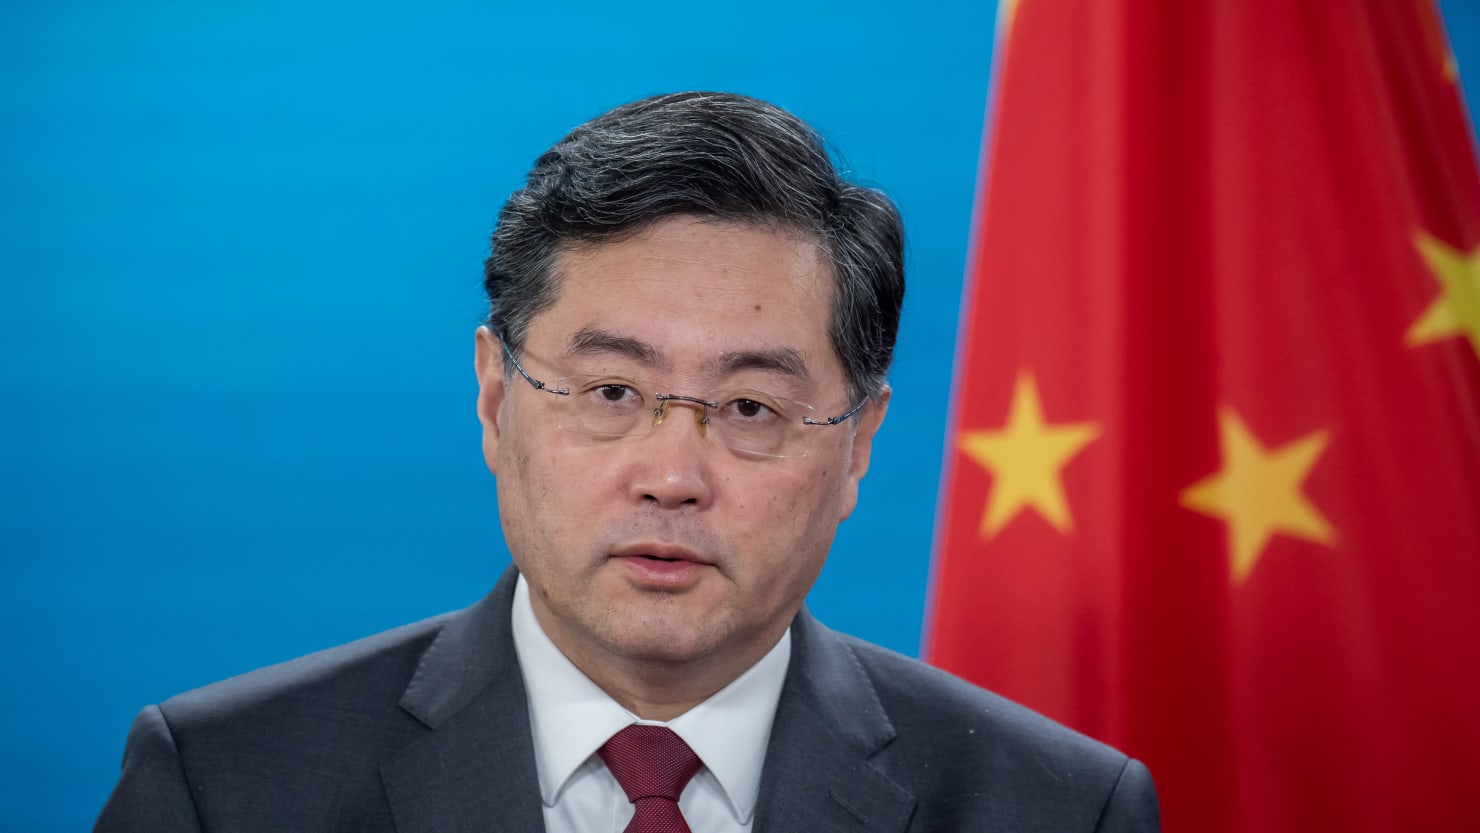 Rumors are raging about the mysterious demise of China’s top diplomat, Qin Gang